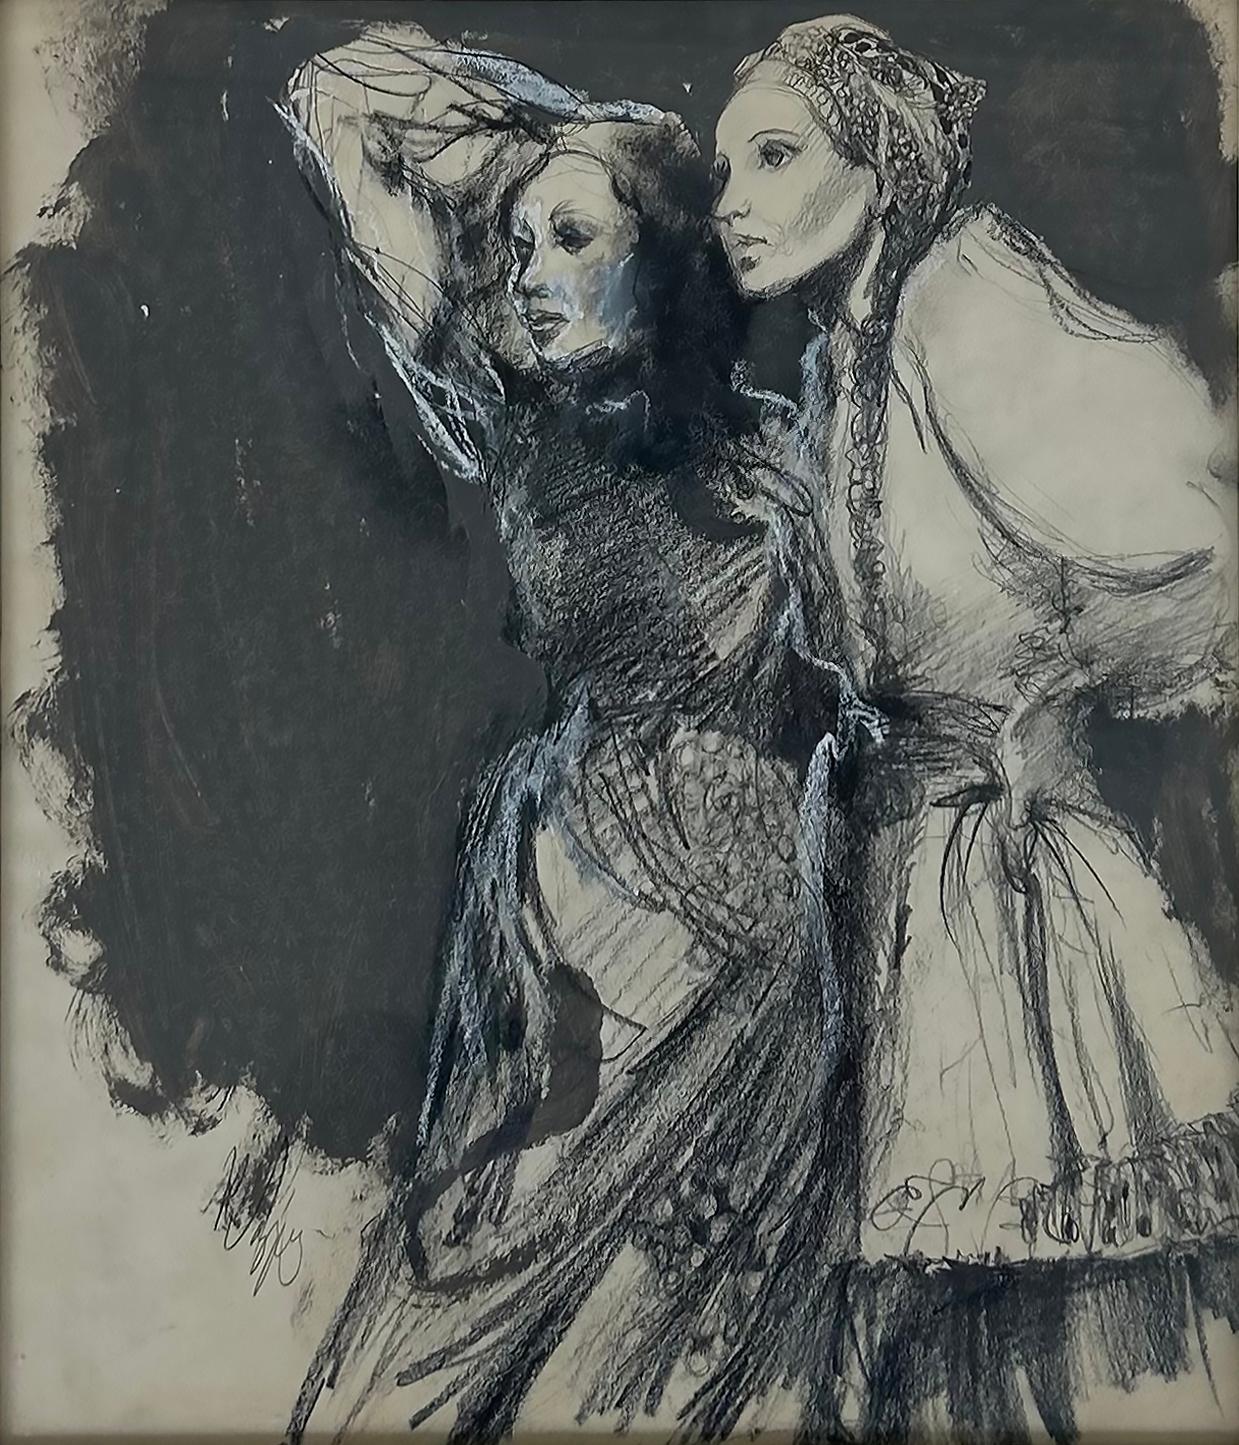  Cuban American Waldo Vazquez Mixed Media  Drawing on Paper Circa 1975

Offered for sale is a framed mixed media figurative charcoal drawing of two women nicely framed under glass by Cuban-American artist Waldo Vasquez.  The work is signed within